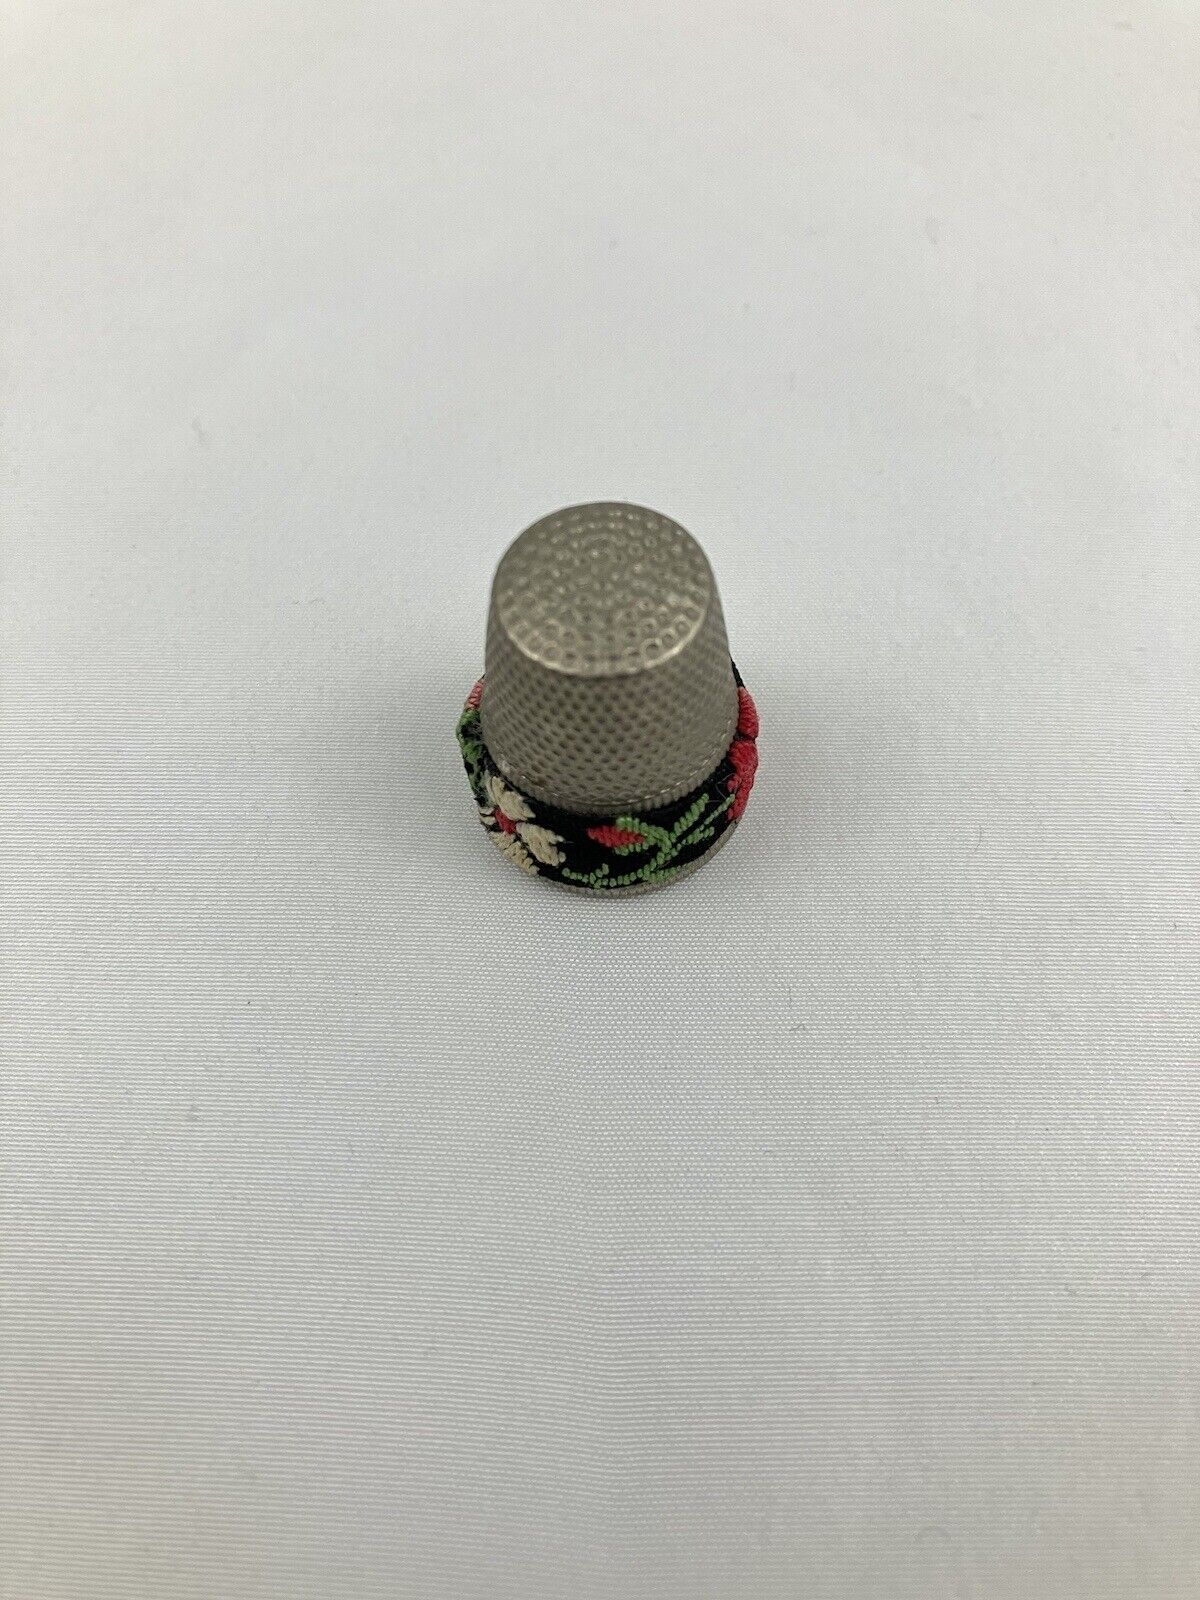 Thimble Silver Tone Metal Made In Austria Red Floral Embroidered Band